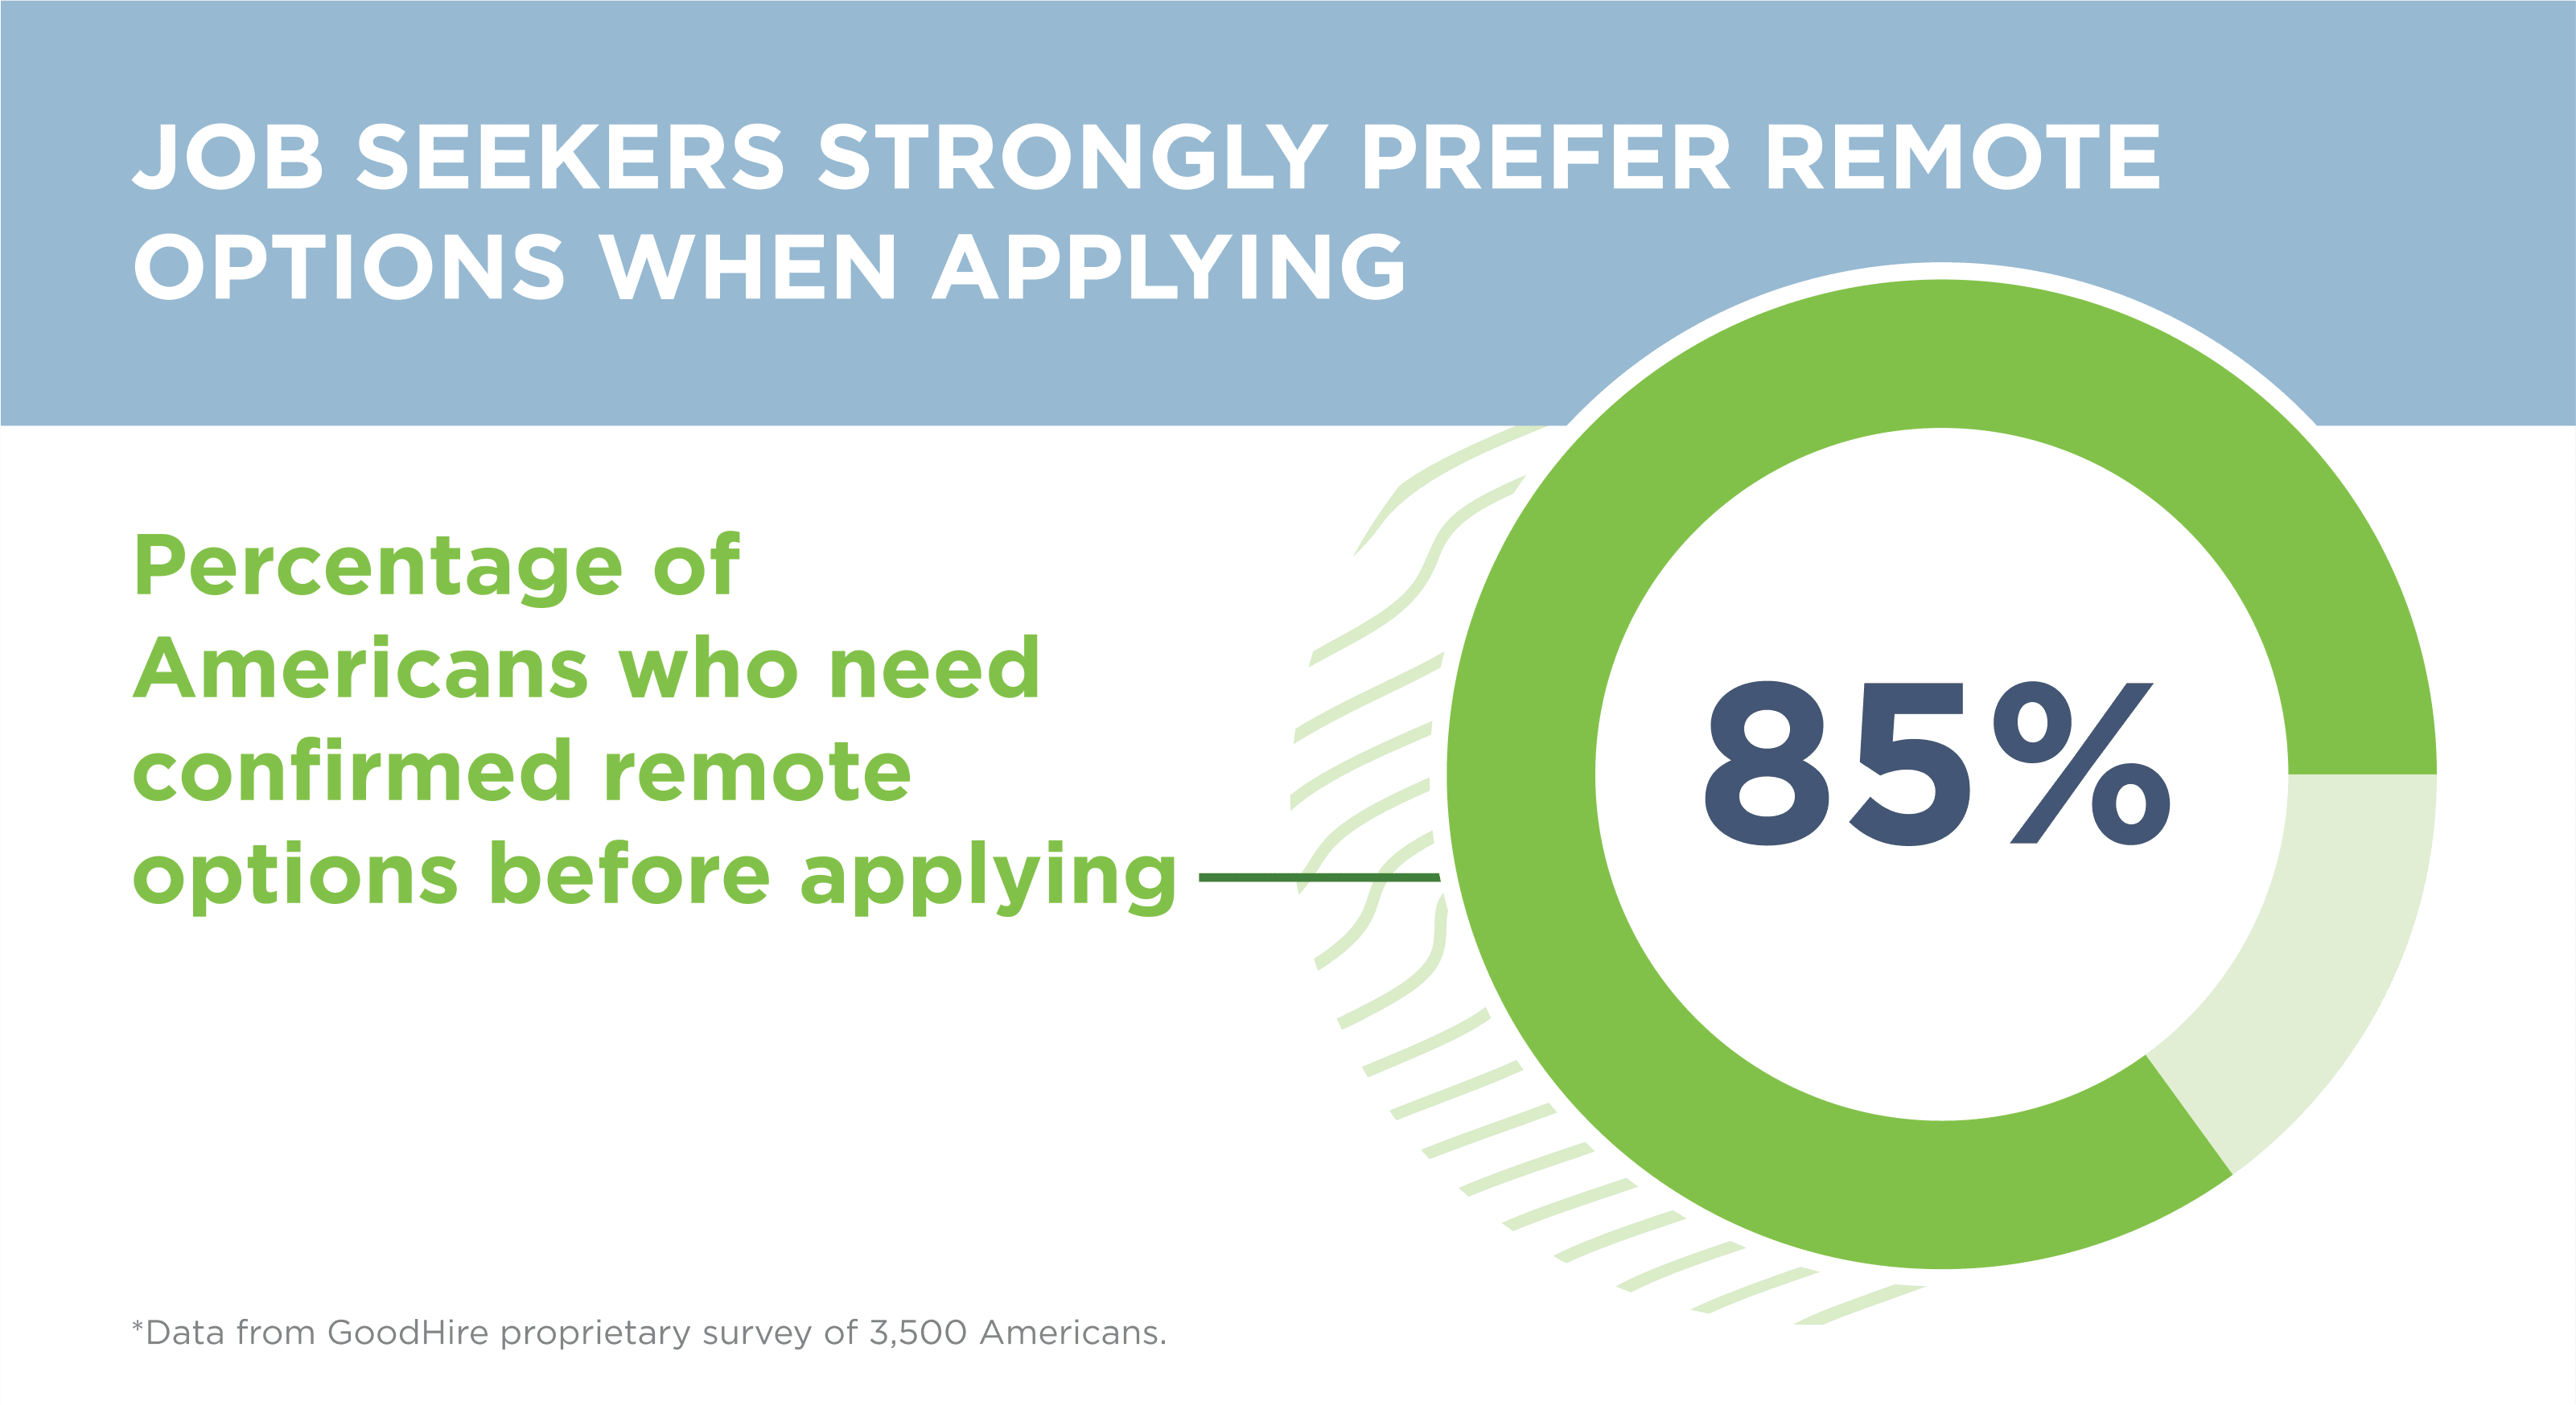 Graph shows 85% of Americans need confirmed remote options before applying.